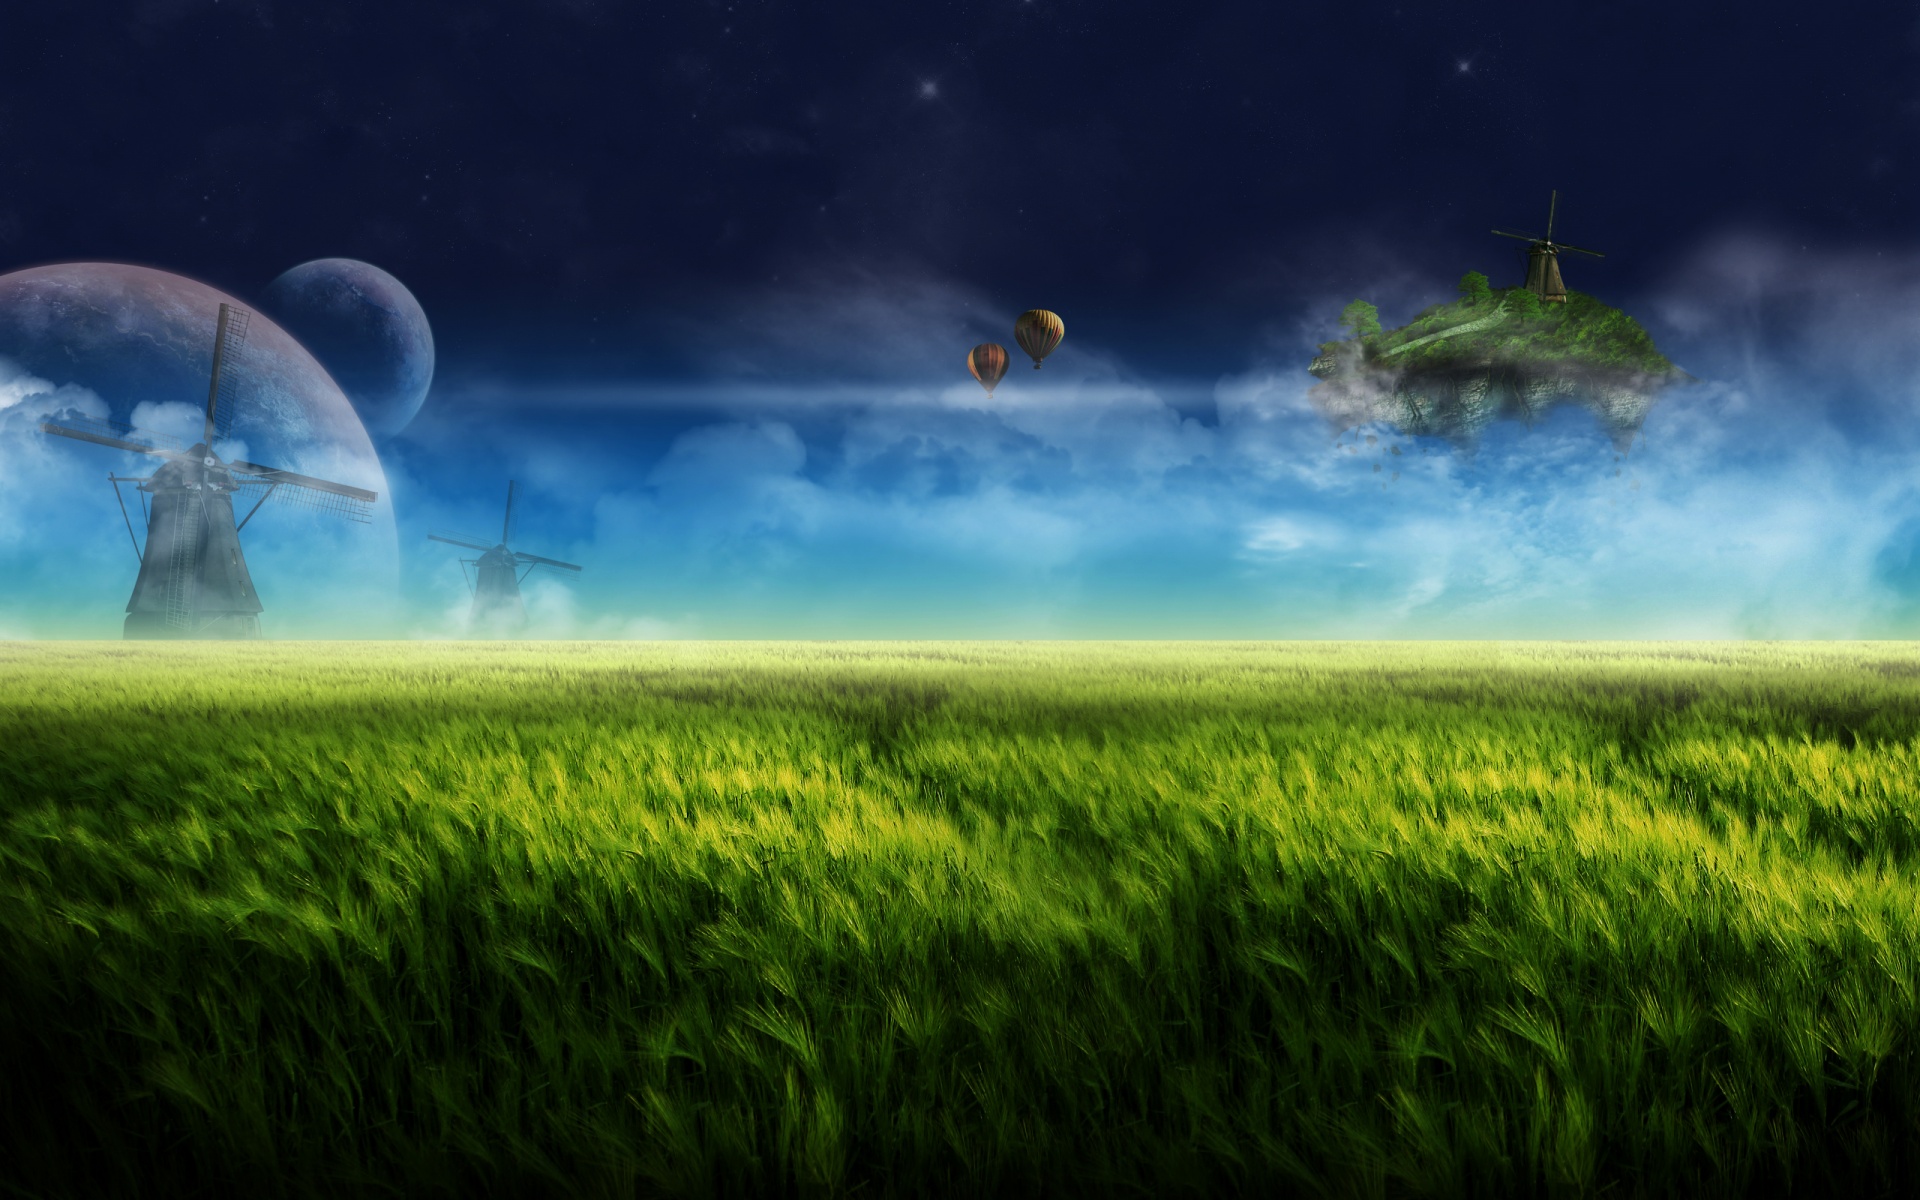 Previous, Photoshop - Floating island blue wallpaper